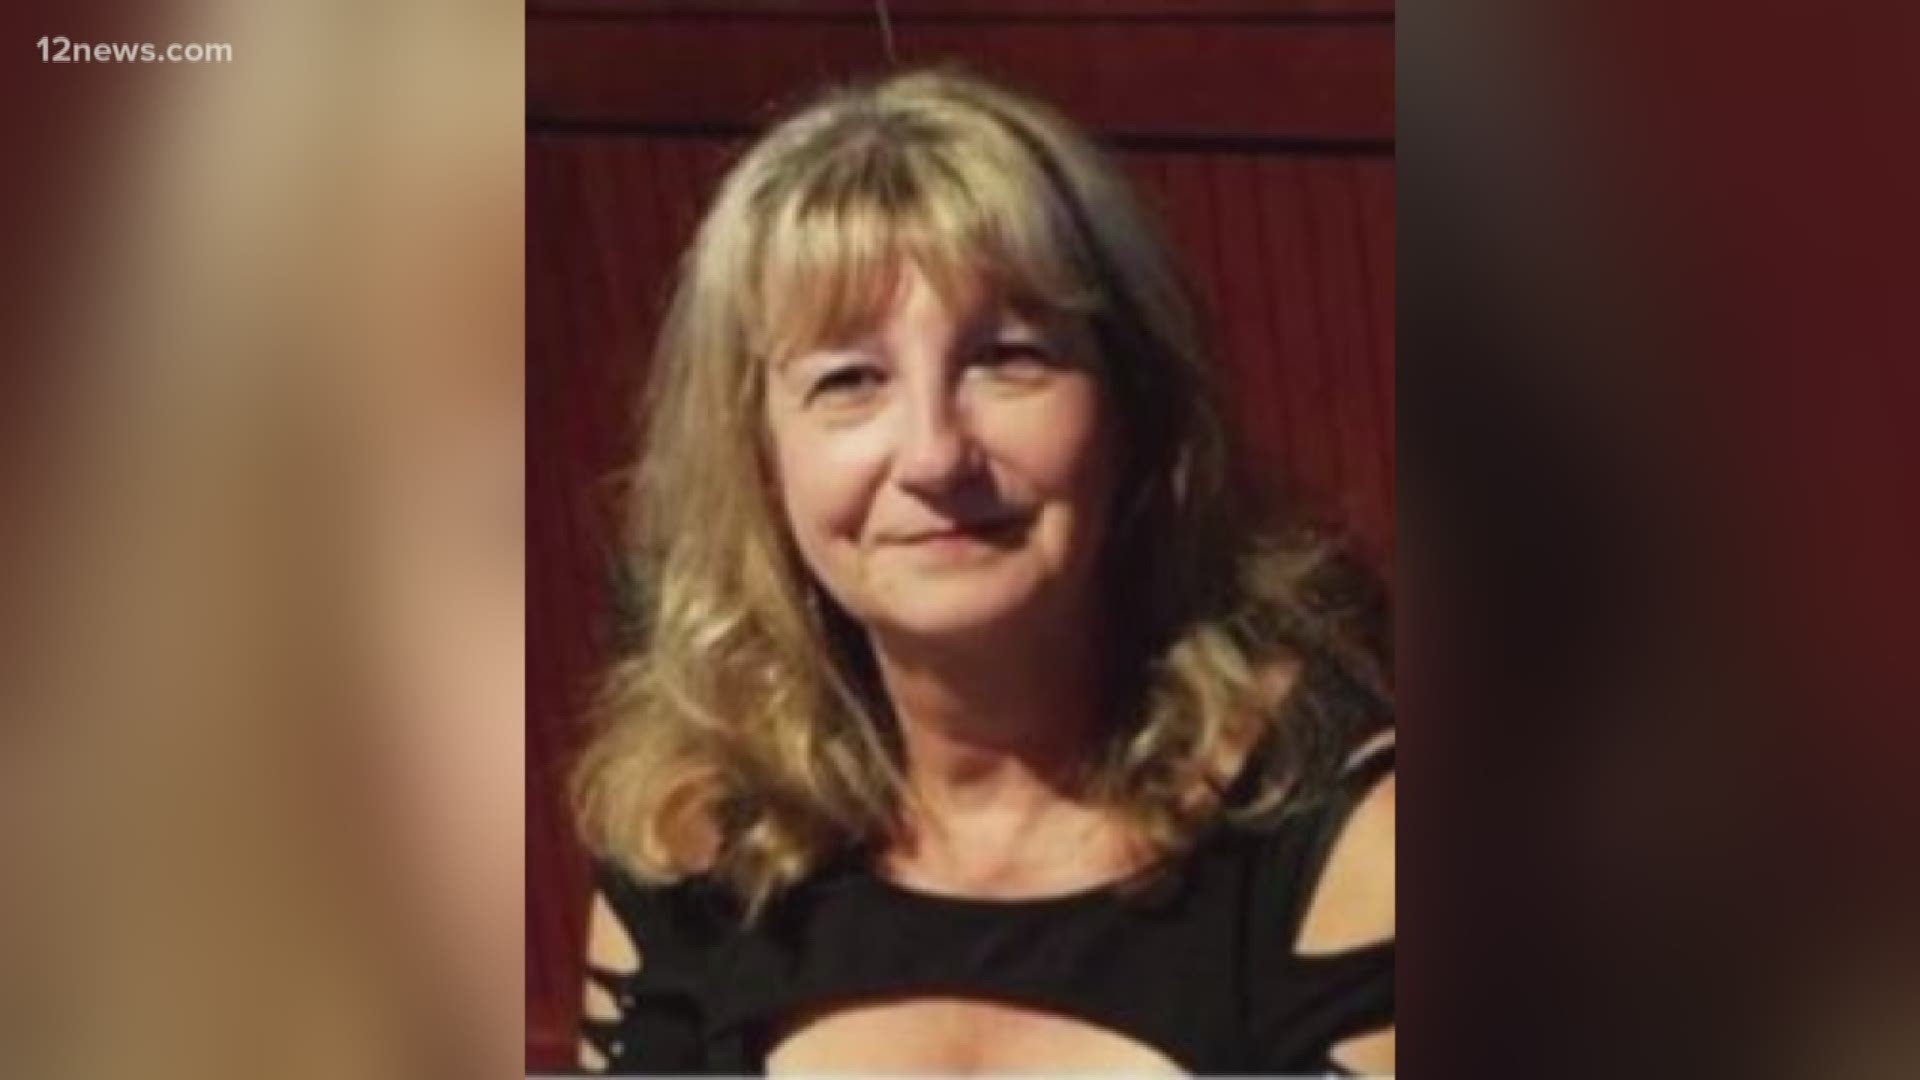 Family says a woman has been missing from her Mesa home for nearly a week. There is also a man with dementia who has been missing from his home.